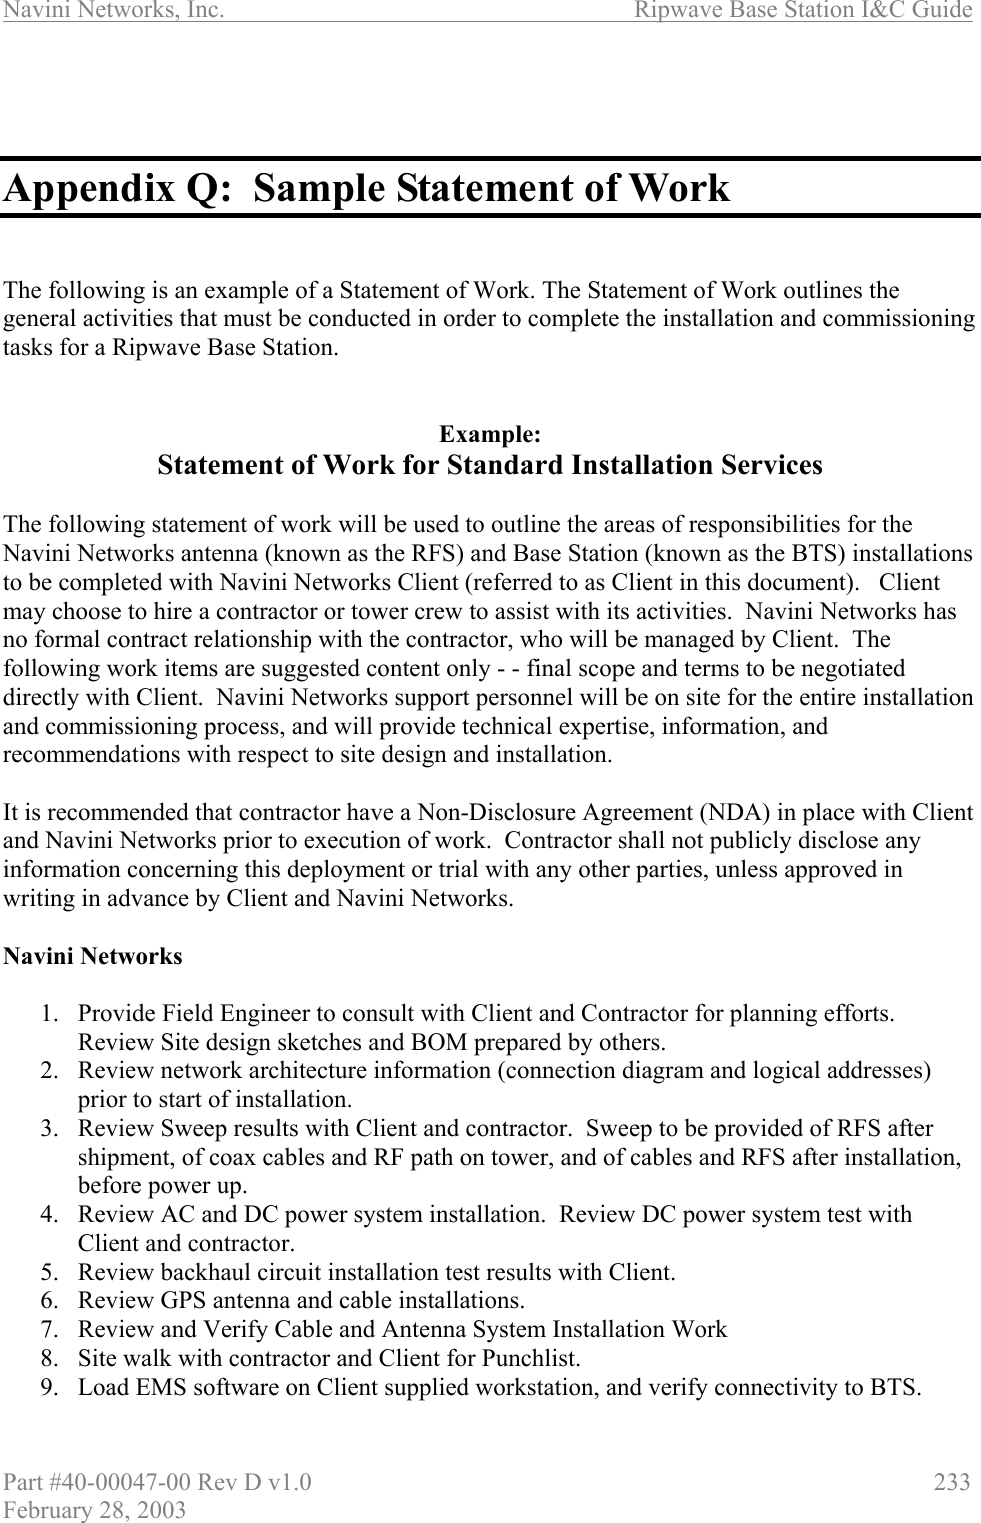 Navini Networks, Inc.                          Ripwave Base Station I&amp;C Guide Part #40-00047-00 Rev D v1.0                     233 February 28, 2003    Appendix Q:  Sample Statement of Work   The following is an example of a Statement of Work. The Statement of Work outlines the general activities that must be conducted in order to complete the installation and commissioning tasks for a Ripwave Base Station.   Example: Statement of Work for Standard Installation Services  The following statement of work will be used to outline the areas of responsibilities for the Navini Networks antenna (known as the RFS) and Base Station (known as the BTS) installations to be completed with Navini Networks Client (referred to as Client in this document).   Client may choose to hire a contractor or tower crew to assist with its activities.  Navini Networks has no formal contract relationship with the contractor, who will be managed by Client.  The following work items are suggested content only - - final scope and terms to be negotiated directly with Client.  Navini Networks support personnel will be on site for the entire installation and commissioning process, and will provide technical expertise, information, and recommendations with respect to site design and installation.  It is recommended that contractor have a Non-Disclosure Agreement (NDA) in place with Client and Navini Networks prior to execution of work.  Contractor shall not publicly disclose any information concerning this deployment or trial with any other parties, unless approved in writing in advance by Client and Navini Networks.  Navini Networks   1.  Provide Field Engineer to consult with Client and Contractor for planning efforts.  Review Site design sketches and BOM prepared by others. 2.  Review network architecture information (connection diagram and logical addresses) prior to start of installation. 3.  Review Sweep results with Client and contractor.  Sweep to be provided of RFS after shipment, of coax cables and RF path on tower, and of cables and RFS after installation, before power up. 4.  Review AC and DC power system installation.  Review DC power system test with Client and contractor. 5.  Review backhaul circuit installation test results with Client. 6.  Review GPS antenna and cable installations. 7.  Review and Verify Cable and Antenna System Installation Work 8.  Site walk with contractor and Client for Punchlist. 9.  Load EMS software on Client supplied workstation, and verify connectivity to BTS. 